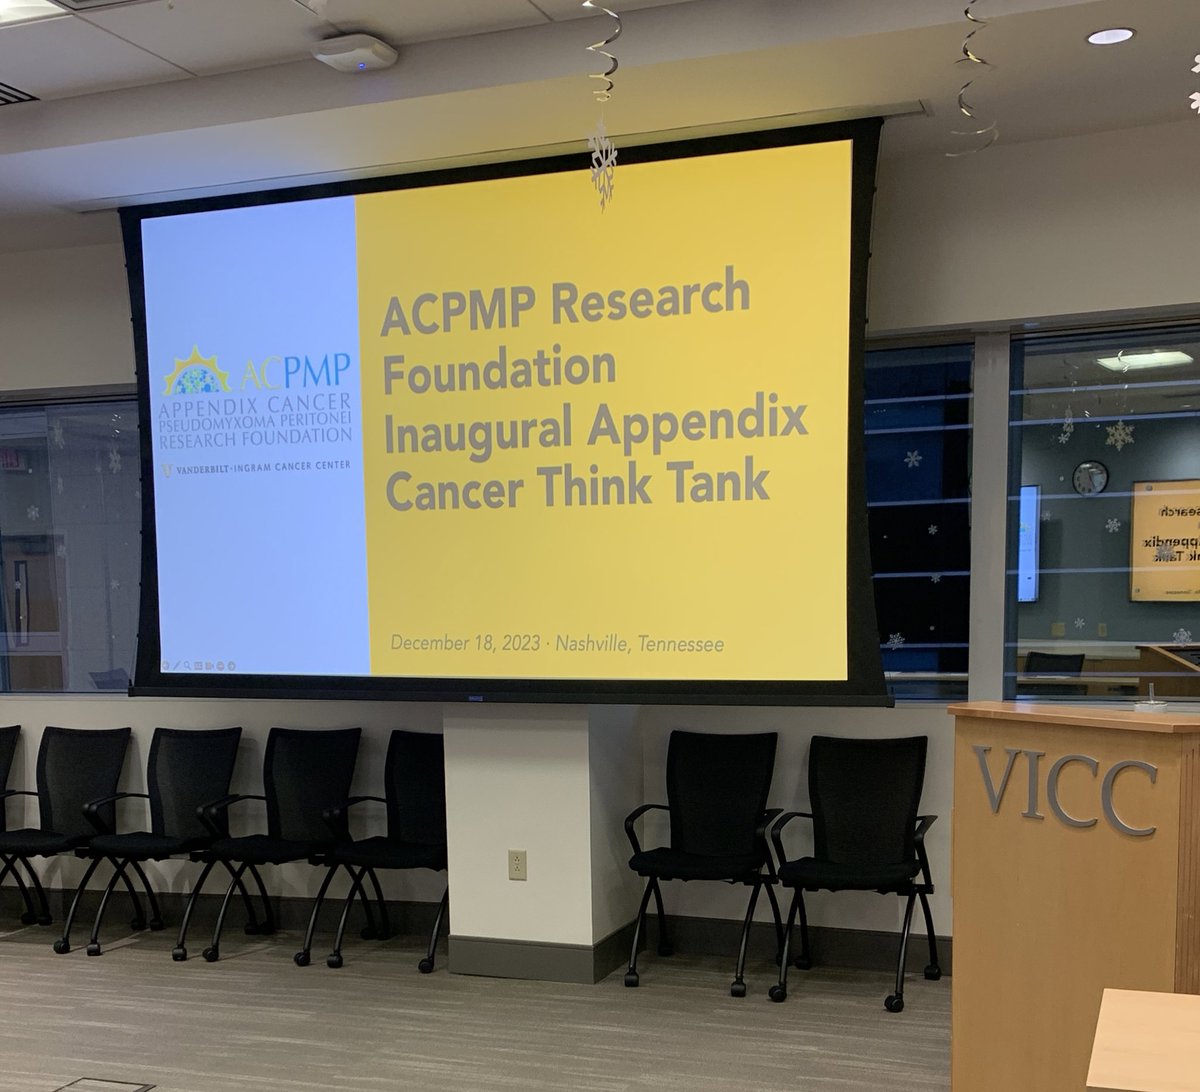 Honored to be chairing & hosting the @acpmpresearch Foundation inaugural #appendixcancer Think Tank—bringing together diverse thought-leaders in the field to collectively identify research priorities & to accelerate progress in these areas to benefit our patients! #acpmpthinktank